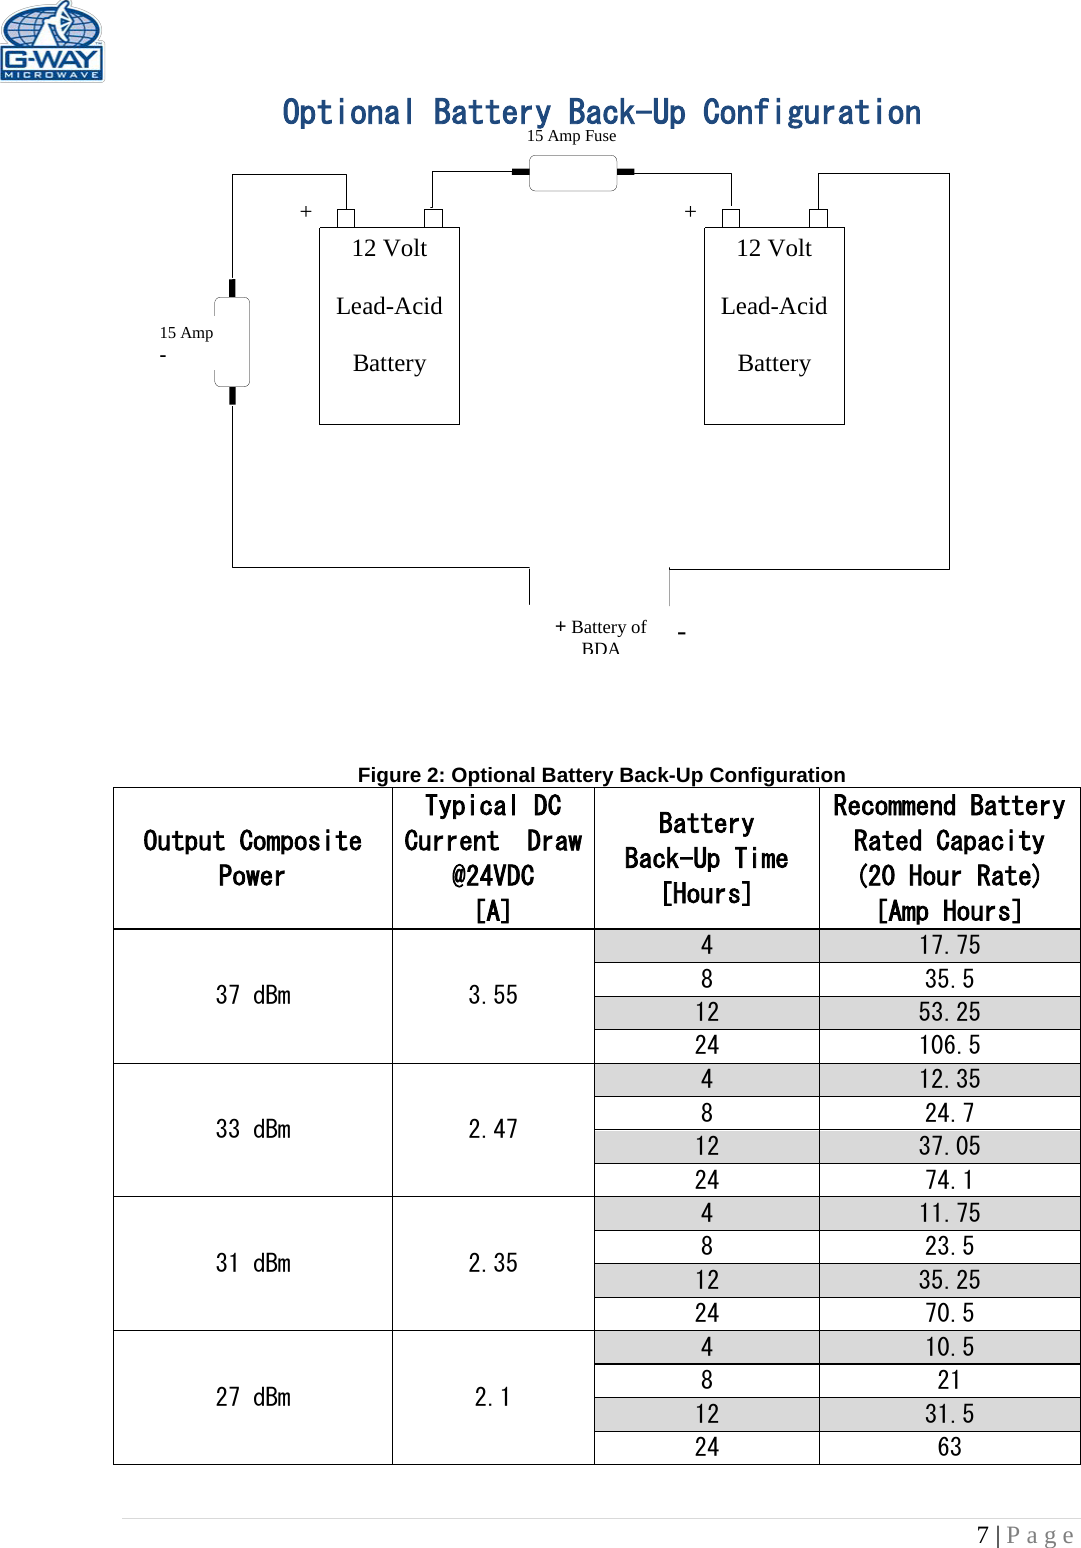   7 | Page  15 Amp Fuse 15 Amp -       12 Volt  Lead-Acid  Battery  12 Volt  Lead-Acid  Battery  + + + Battery of  BDA - Optional Battery Back-Up Configuration                  Figure 2: Optional Battery Back-Up Configuration Output Composite Power Typical DC Current  Draw @24VDC [A] Battery Back-Up Time [Hours] Recommend Battery Rated Capacity (20 Hour Rate) [Amp Hours] 37 dBm  3.55 4  17.75 8  35.5 12  53.25 24  106.5 33 dBm  2.47 4  12.35 8  24.7 12  37.05 24  74.1 31 dBm  2.35 4  11.75 8  23.5 12  35.25 24  70.5 27 dBm  2.1 4  10.5 8  21 12  31.5 24  63  